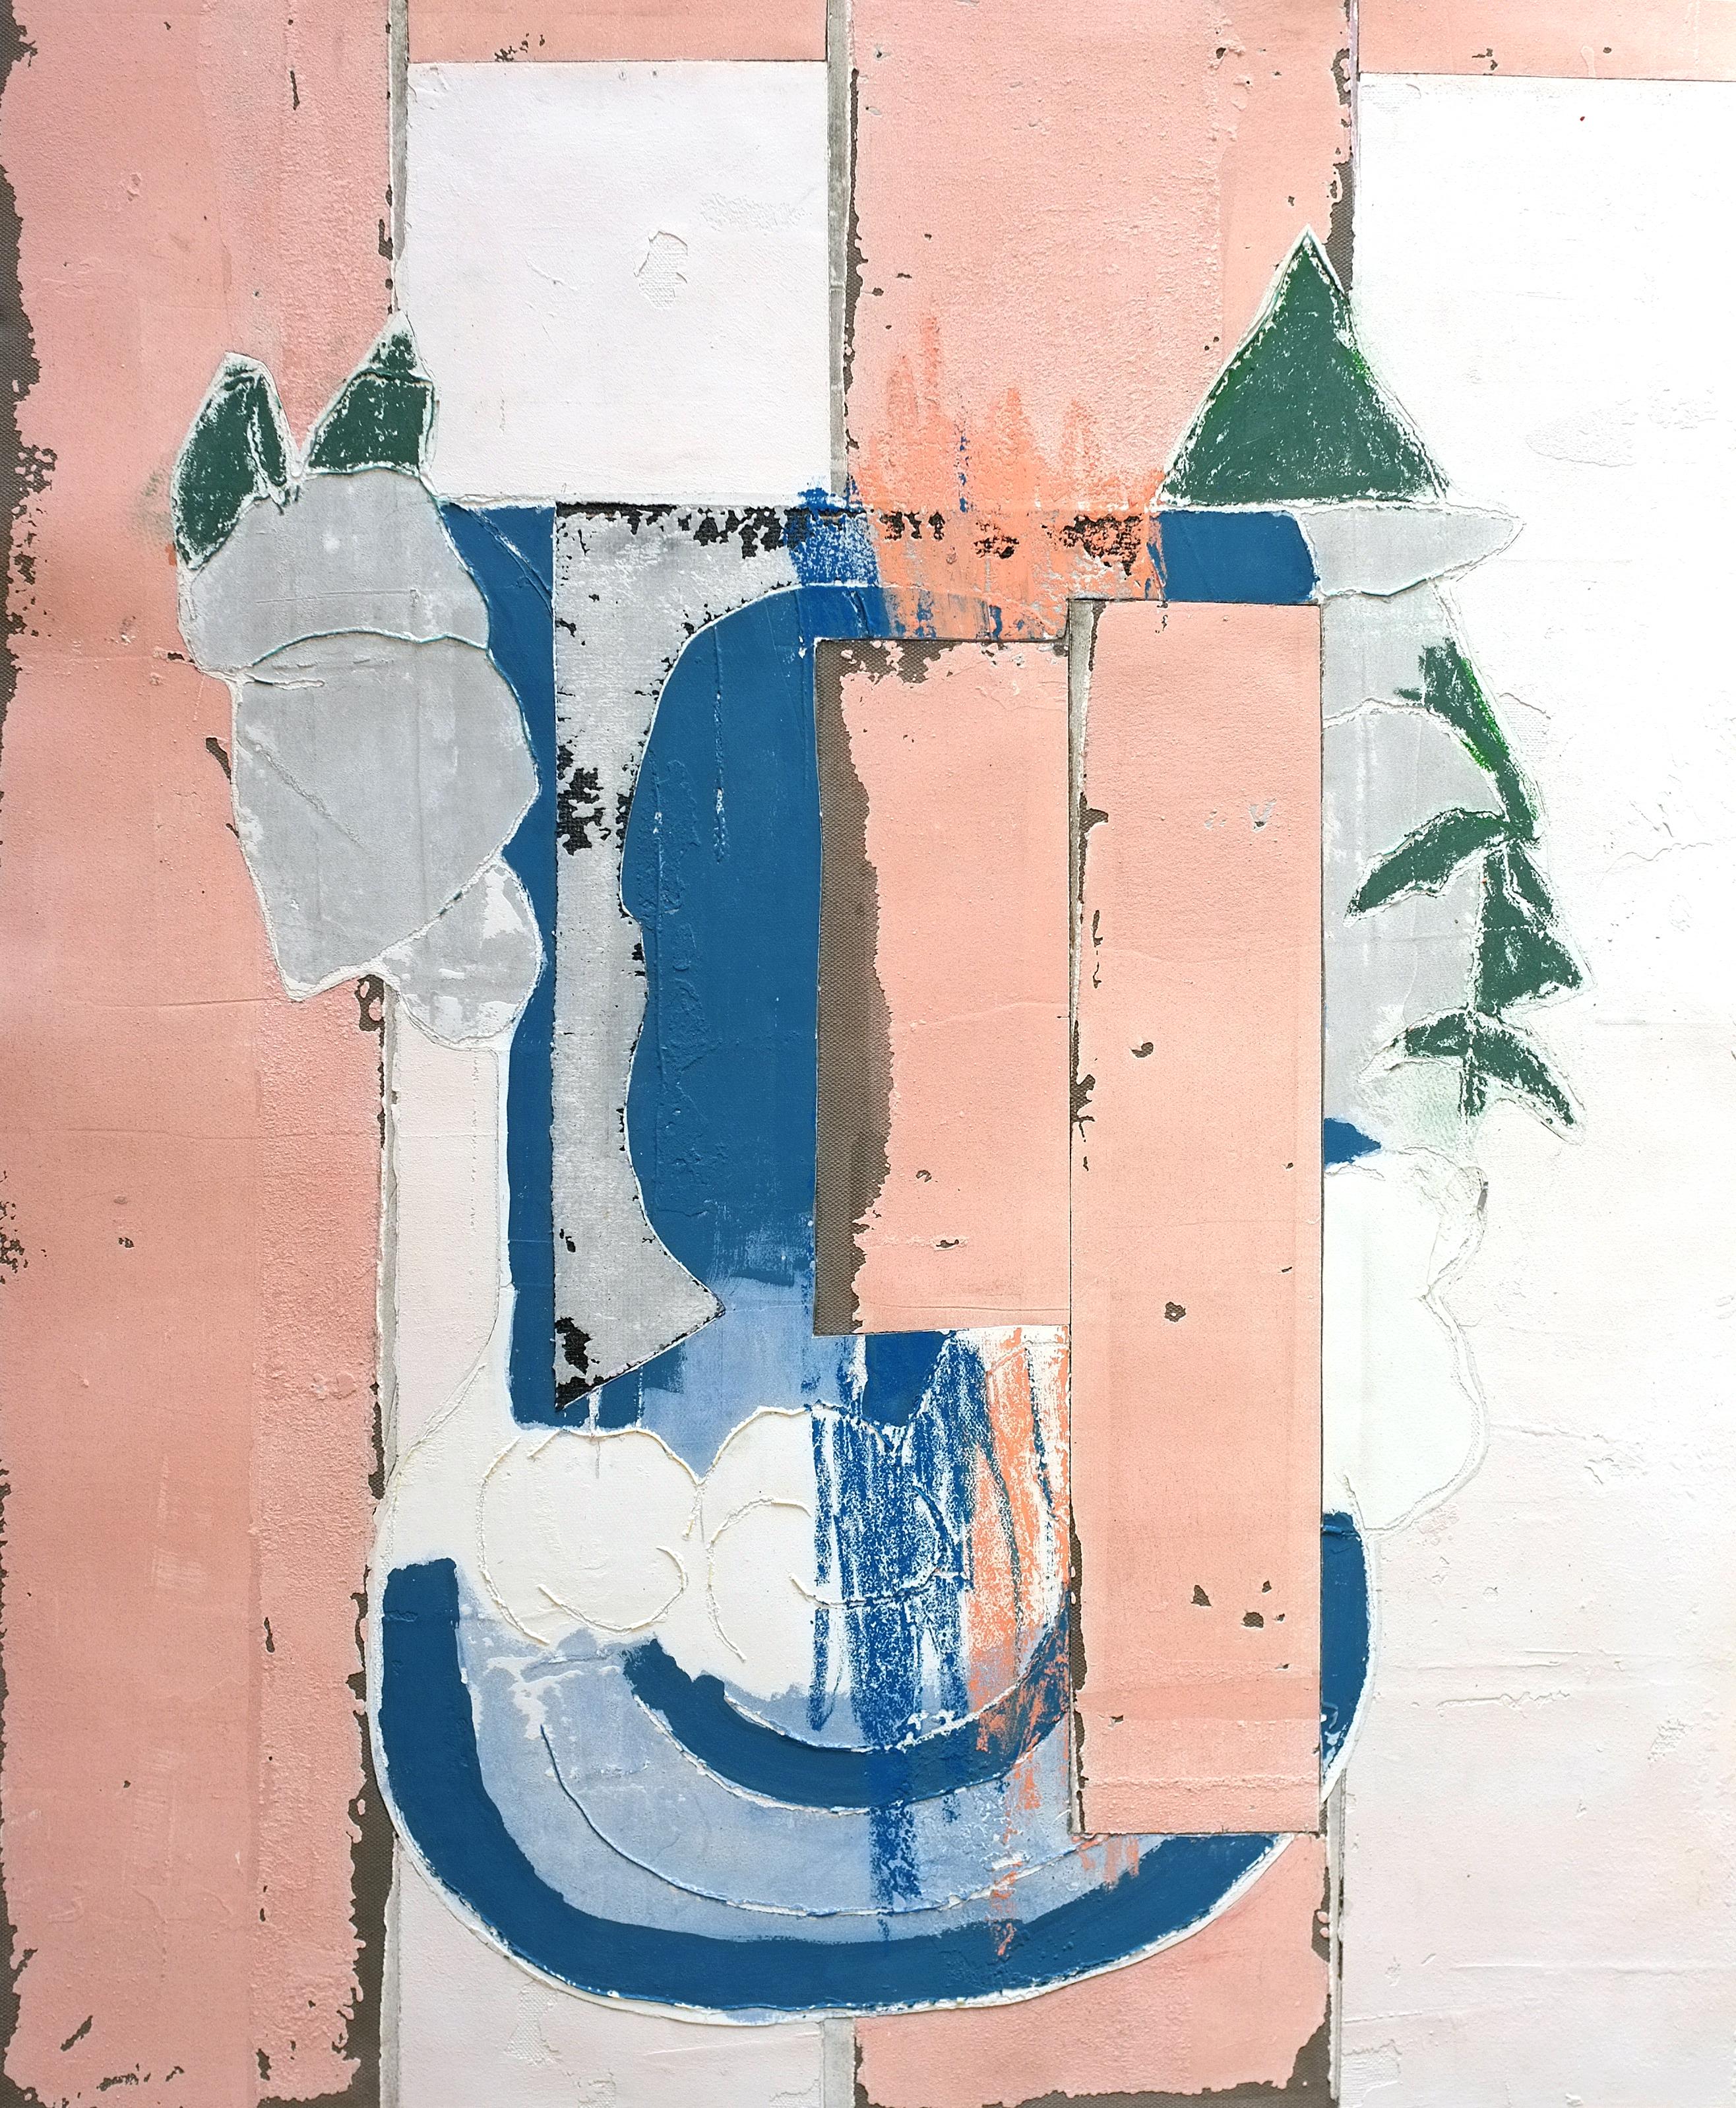 'Chinese Restaurant' by Antoine Puisais - beautifully romantic contemporary abstract mixed media painting on linen. It is a pink collage with architectural geometrical patterns. Its small size and deep blue tones will complement any interior and